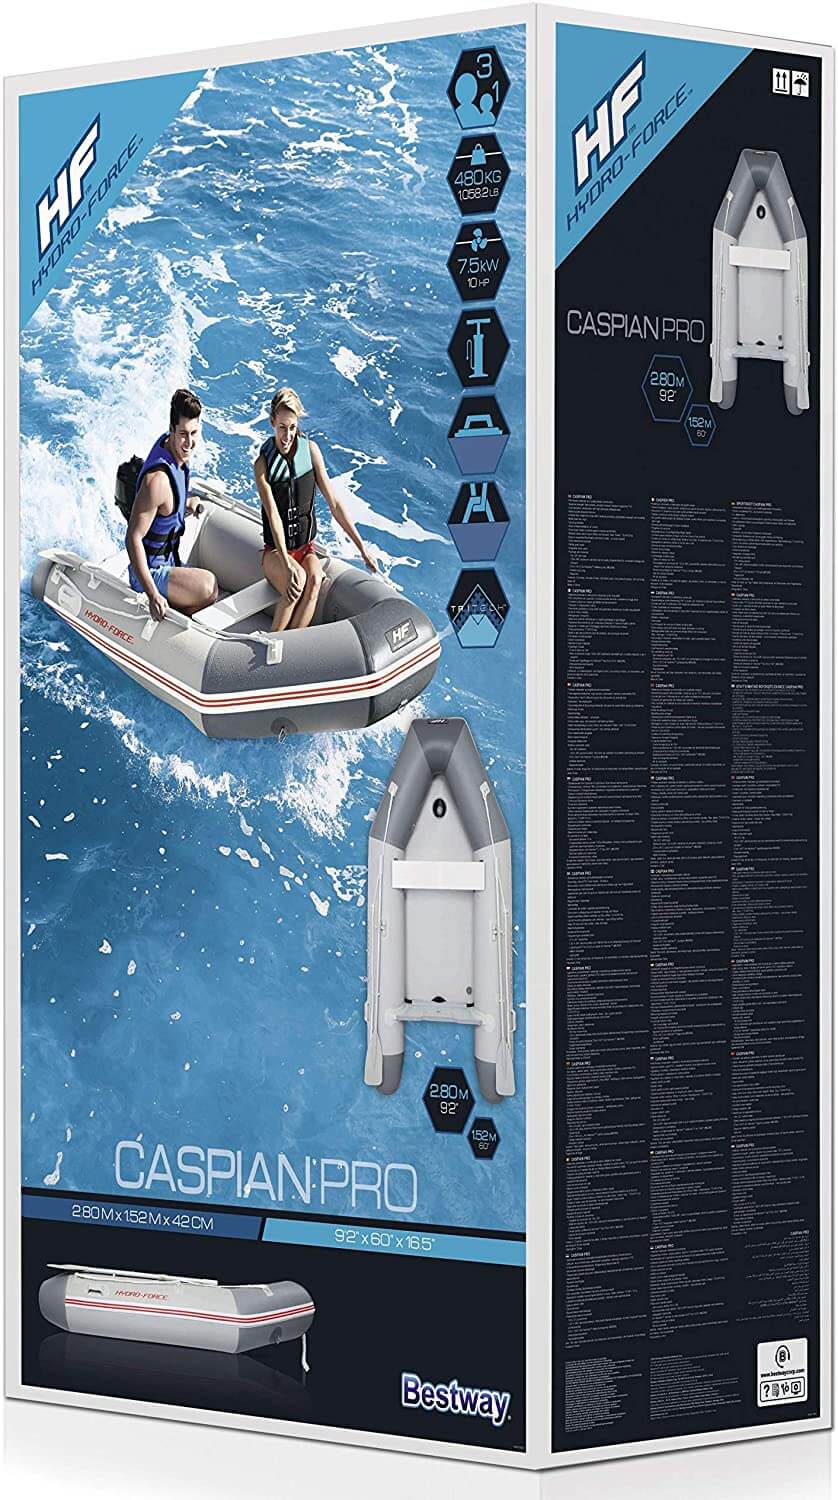 Bestway Hydro-Force Caspian Pro Sport Boat Set for 3 Adults and 1 Child, 280 x 152 x 42 cm - MGA STAR MARKETING